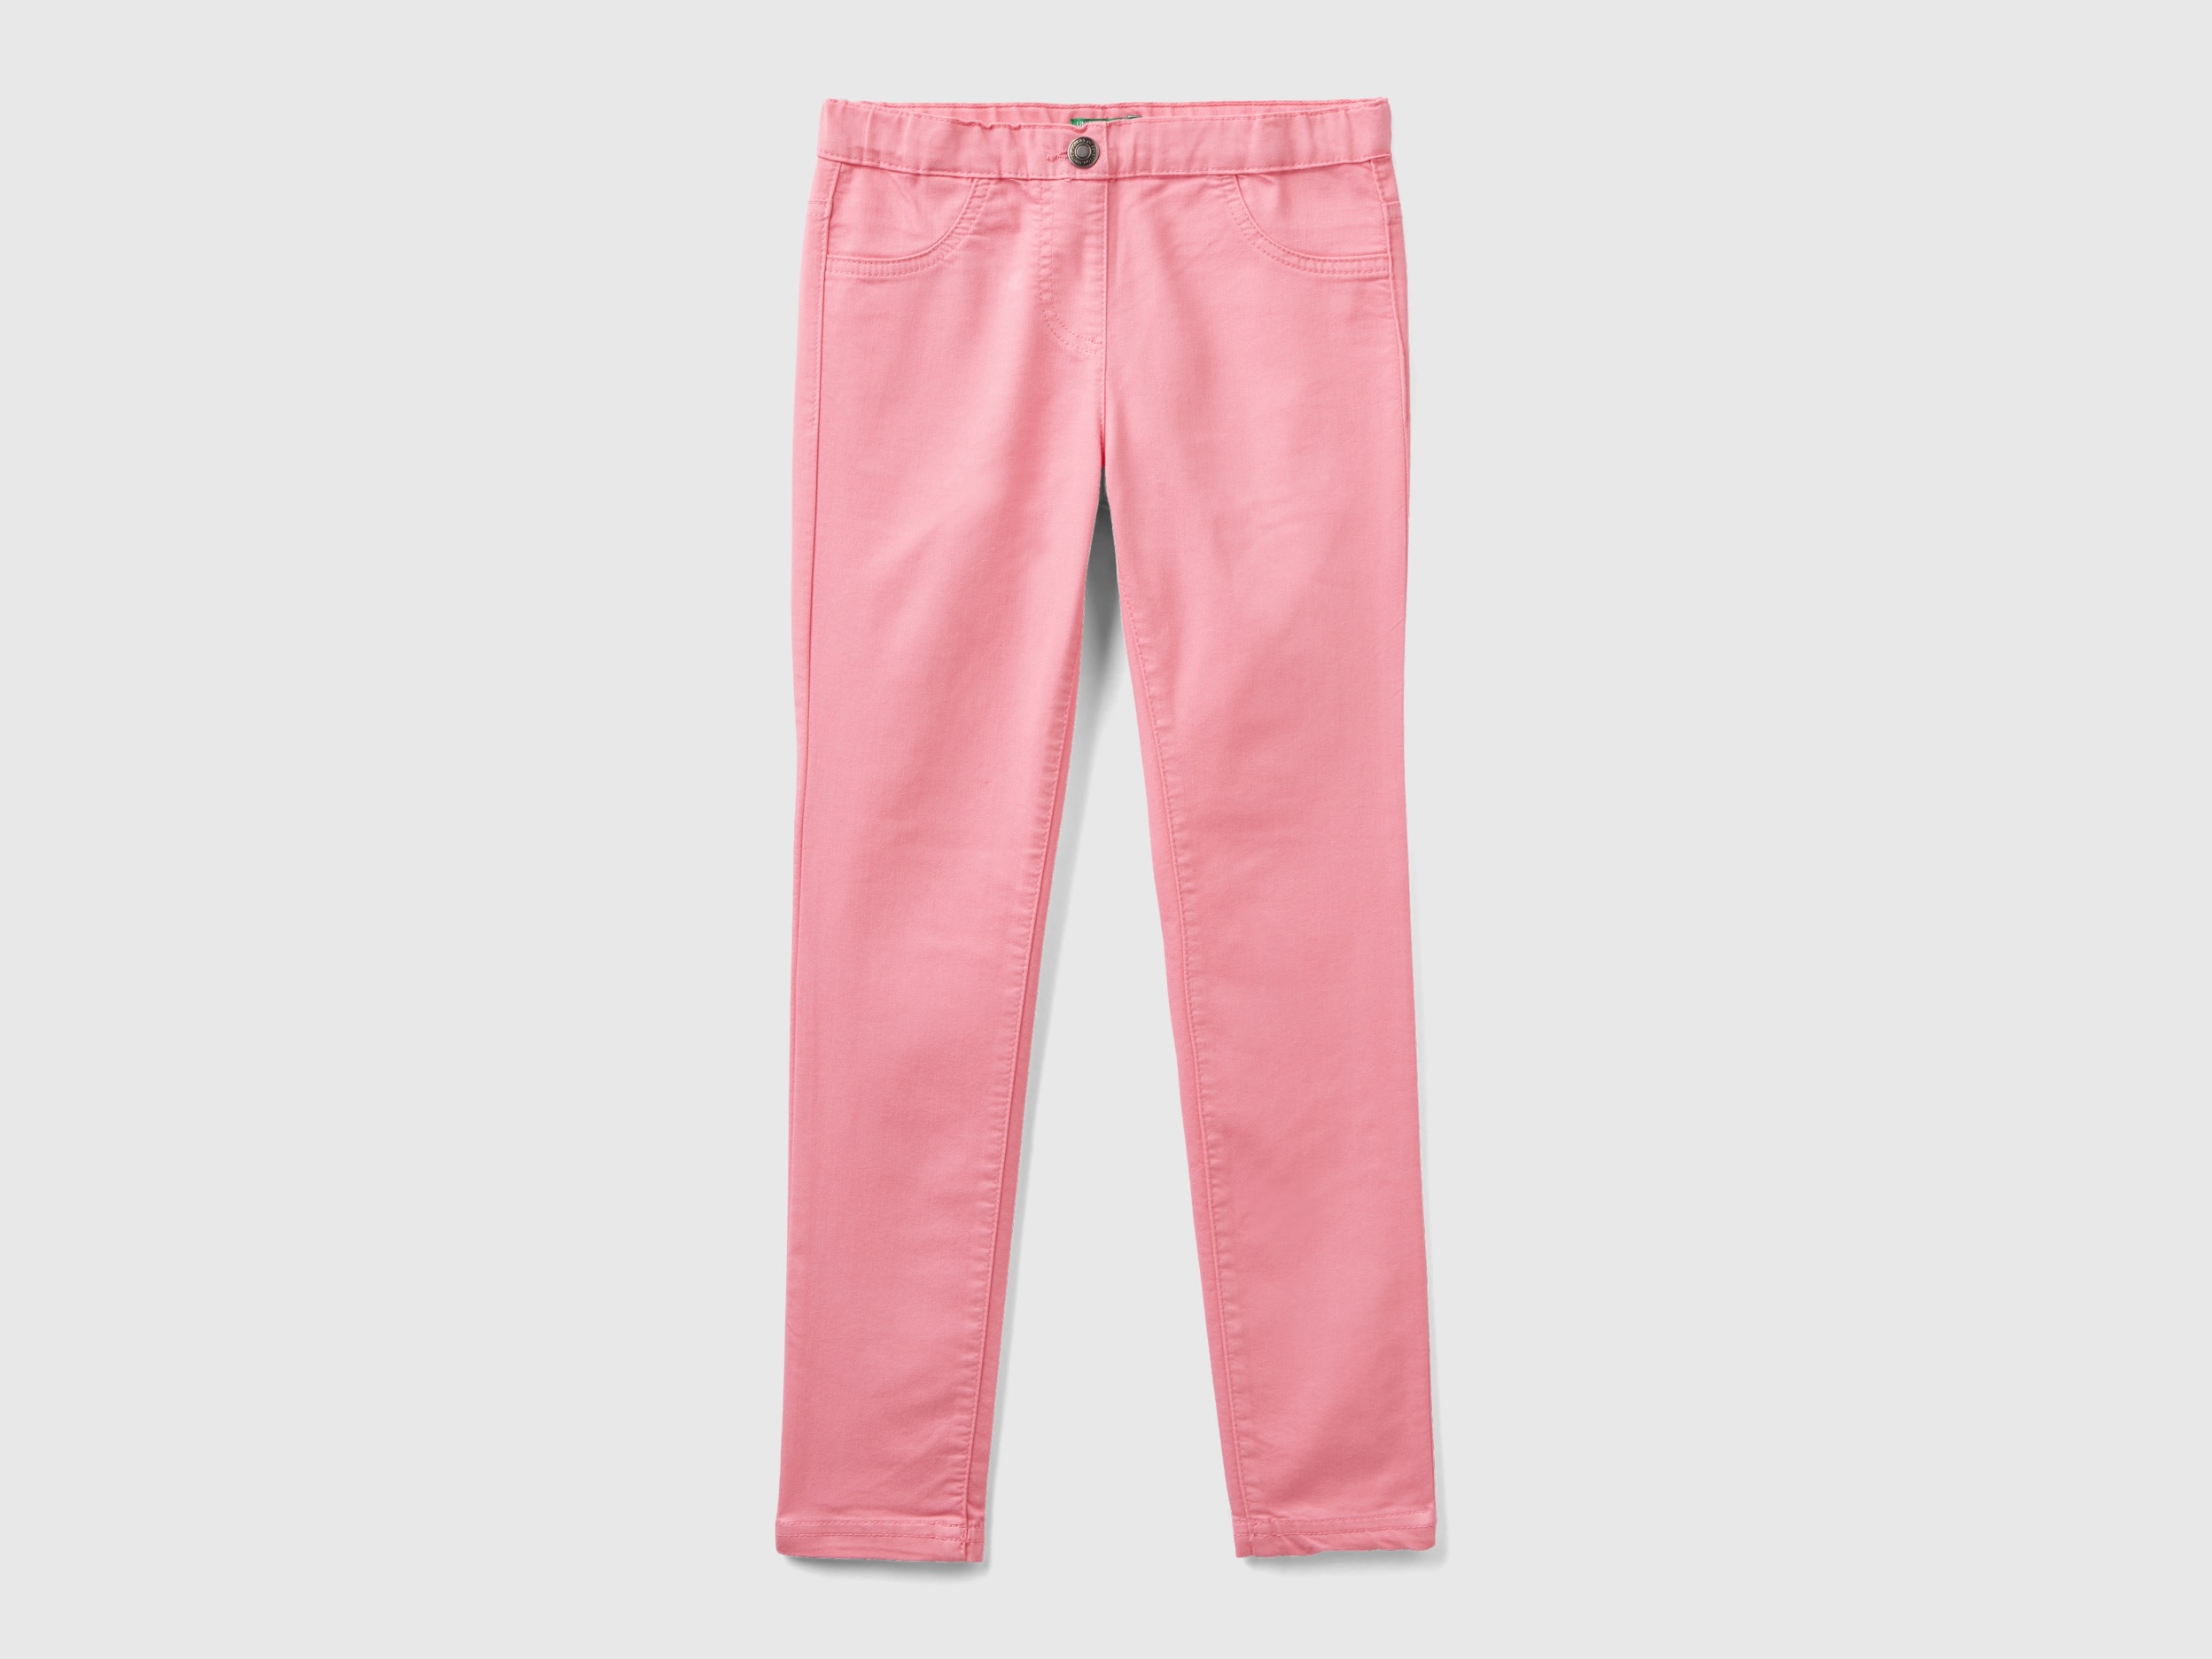 Benetton, Super Skinny Trousers, size M, Pink, Kids